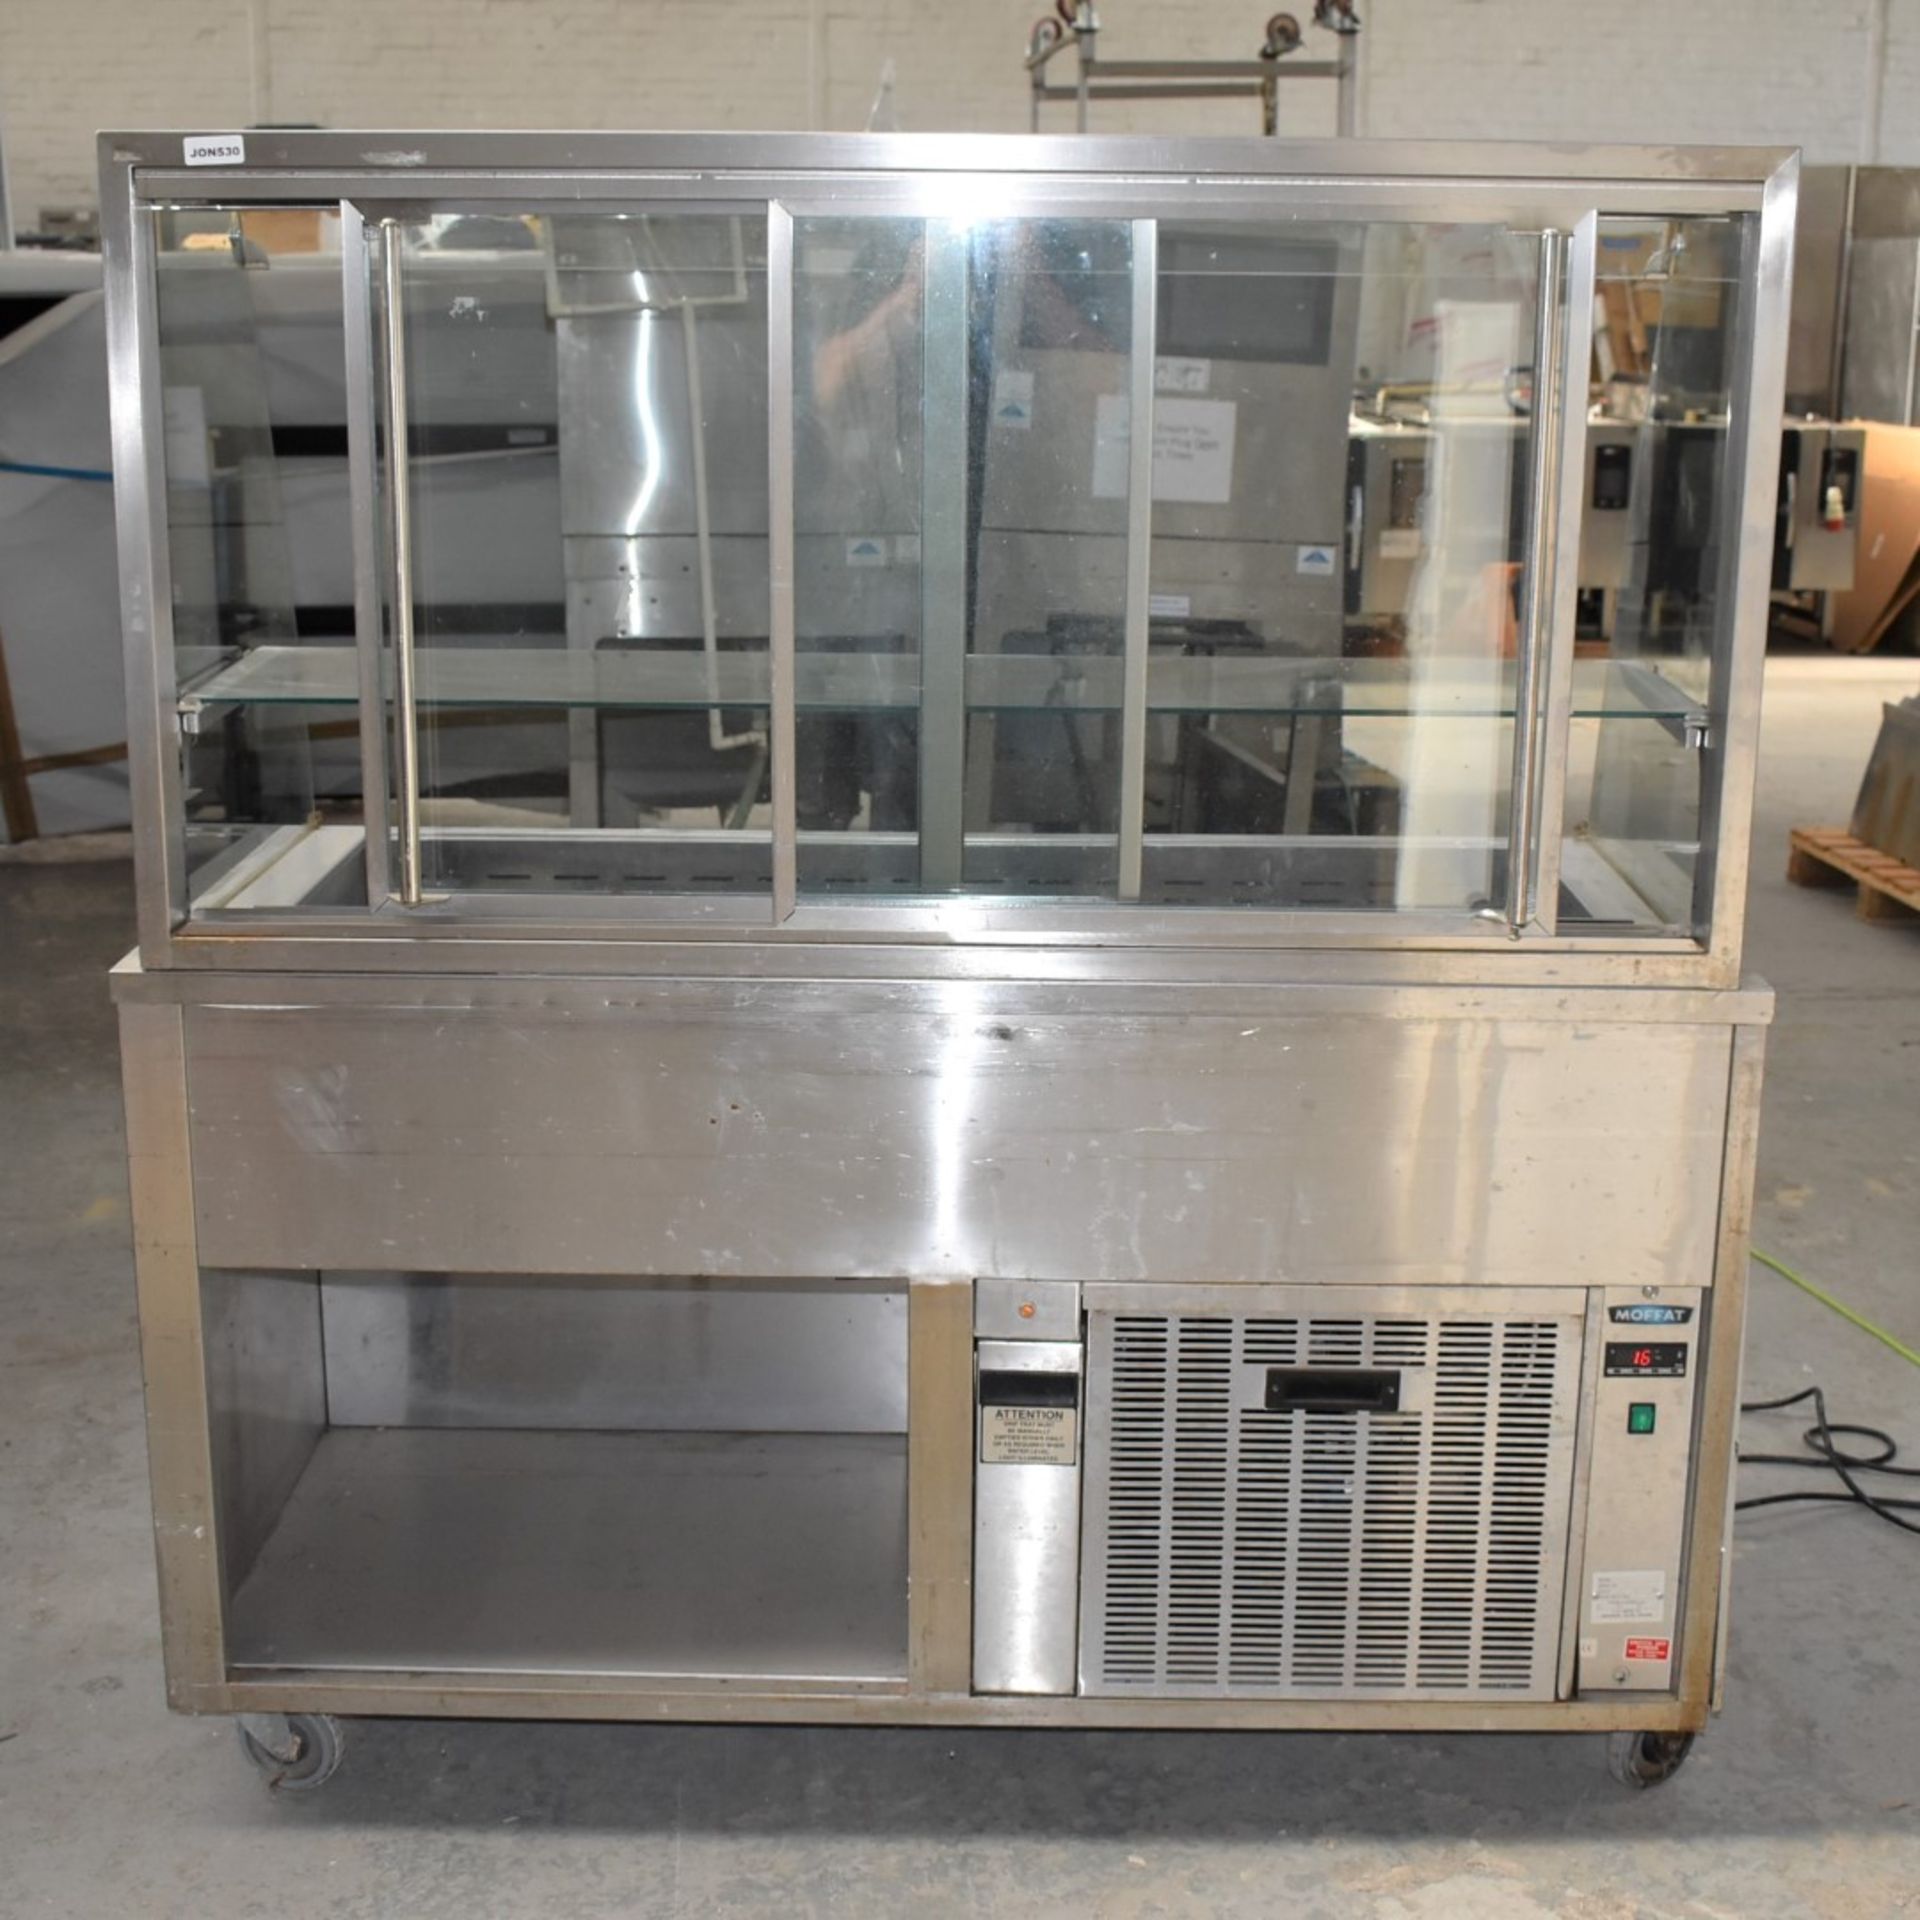 1 x Moffat Self Serve Refrigerated Food Chiller - 240v - Dimensions: H160 x W150 x D64 cms - Image 2 of 8